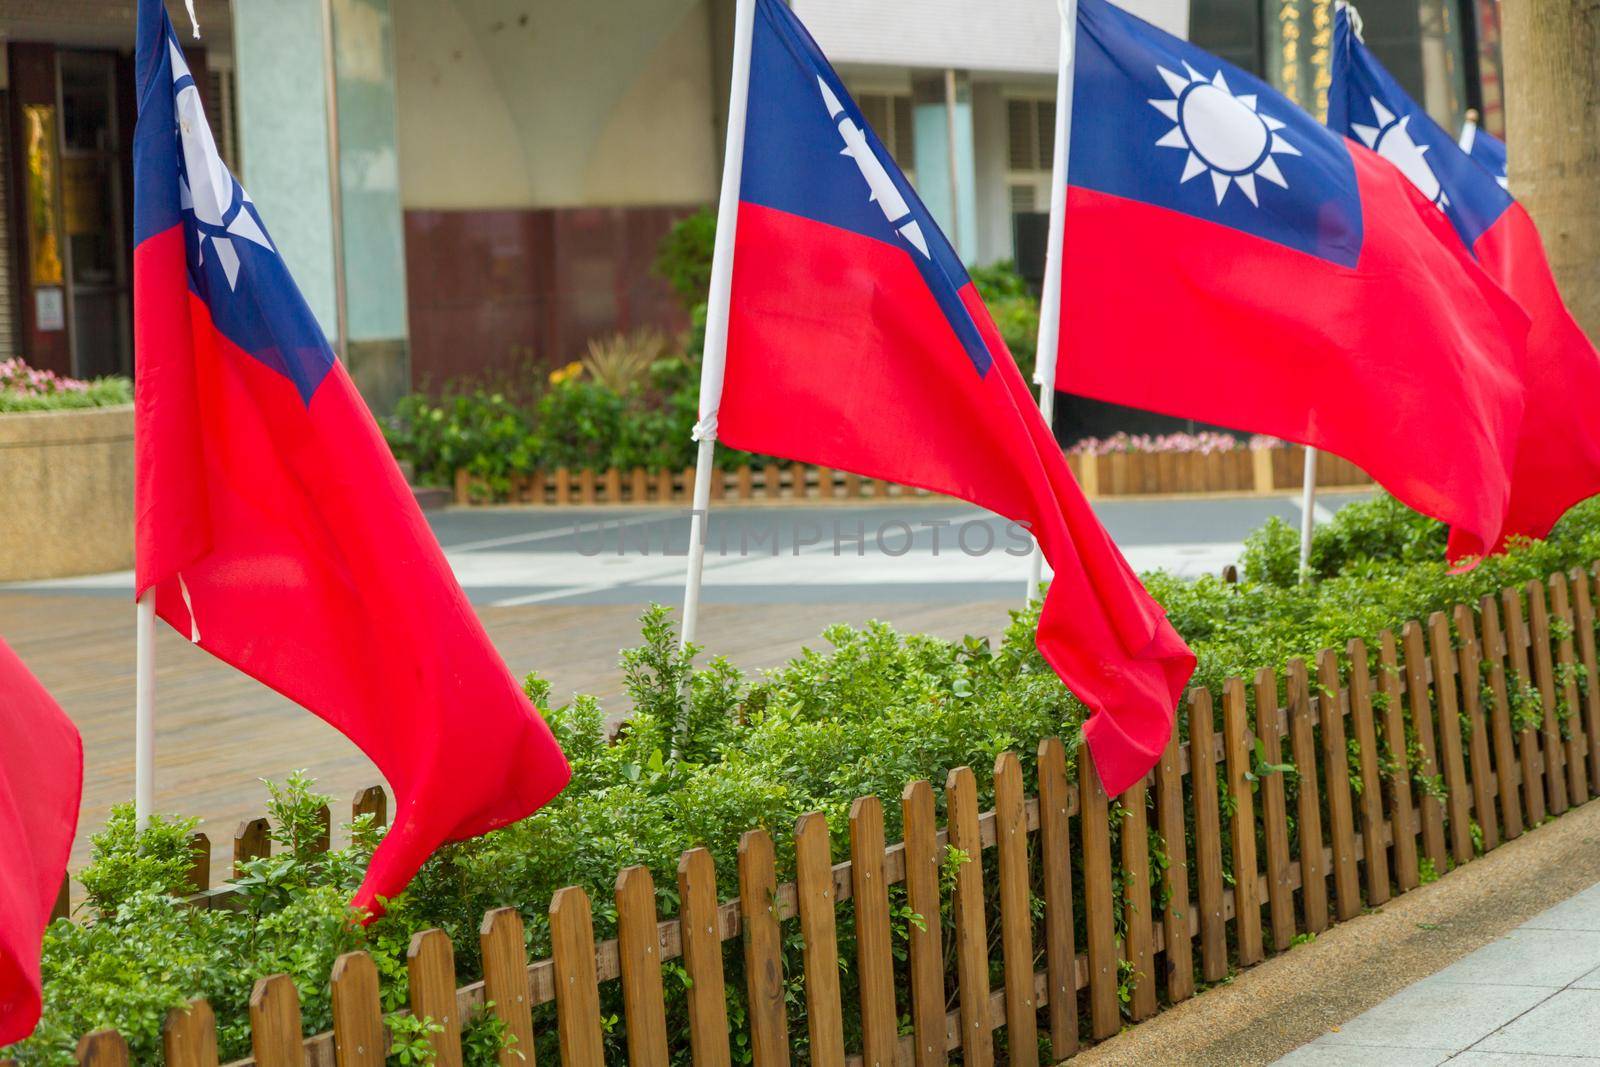 Taiwan flags blowing in wind by imagesbykenny